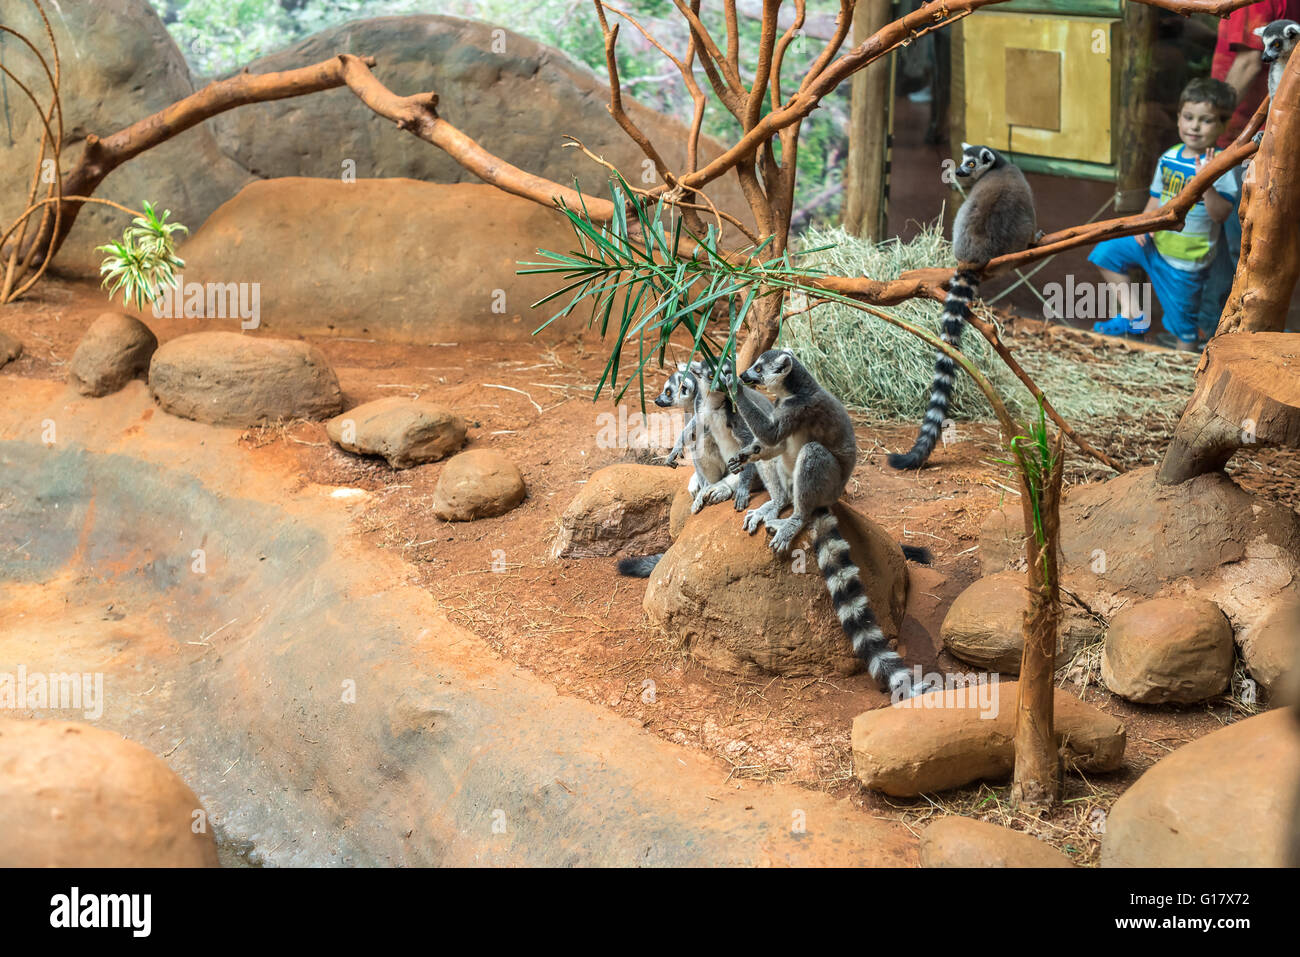 Sao Paulo, Brazil, jan 16, 2016: The ring tailed lemur (lemur catta) eating and sitting by a tree. Stock Photo